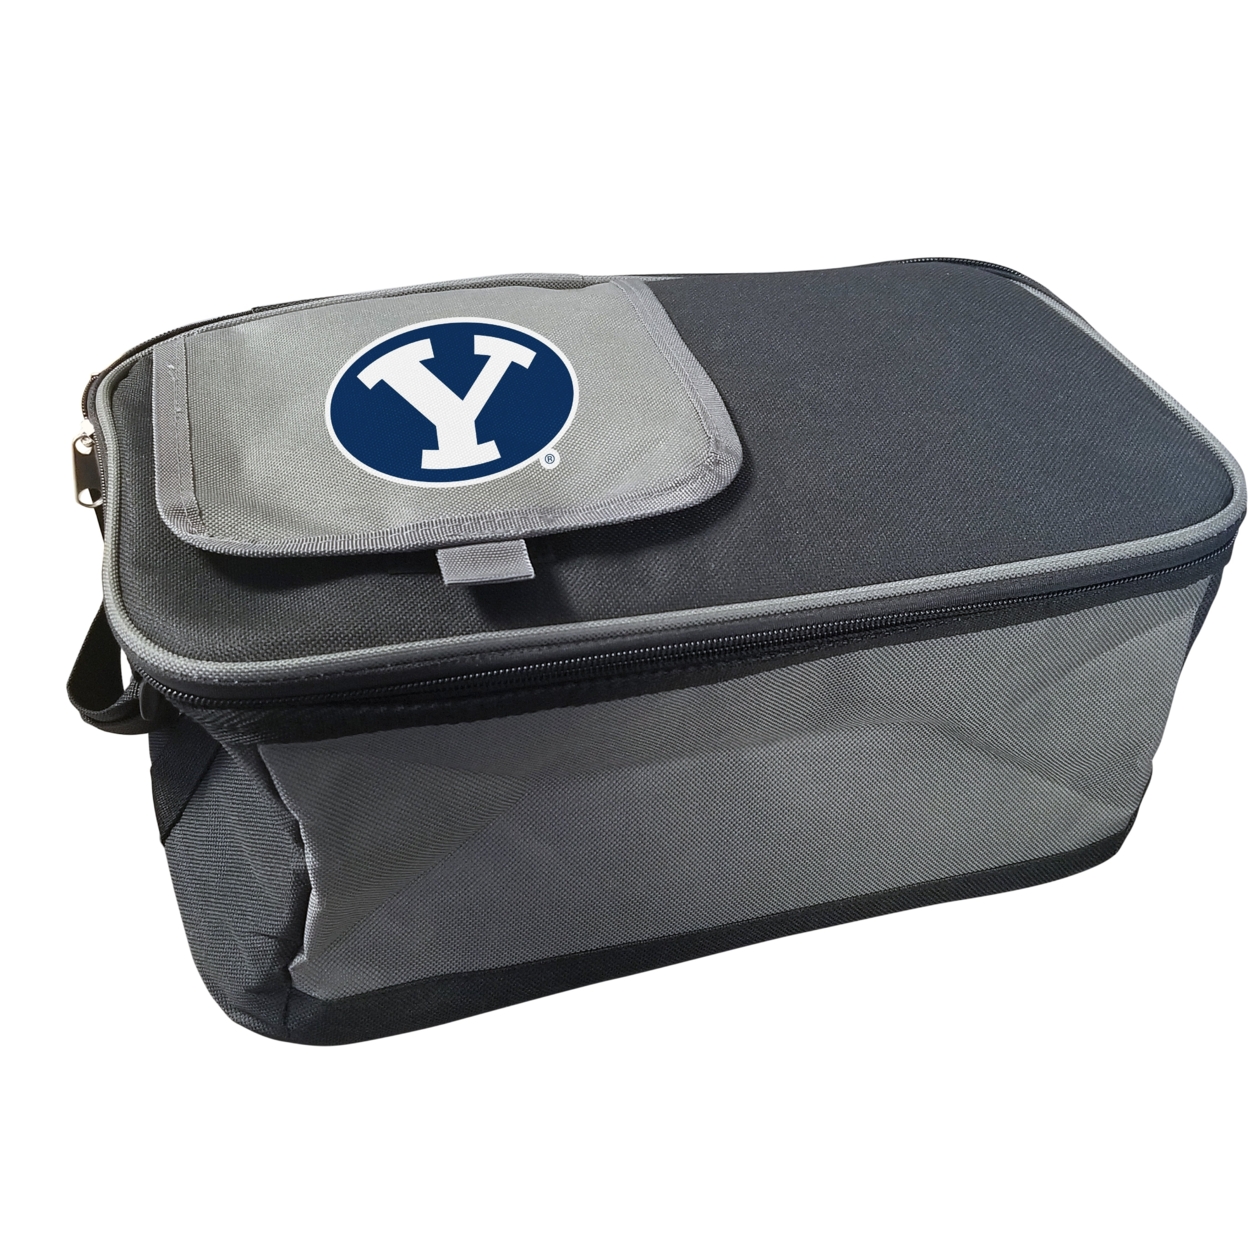 Brigham Young Cougars 9 Pack Cooler